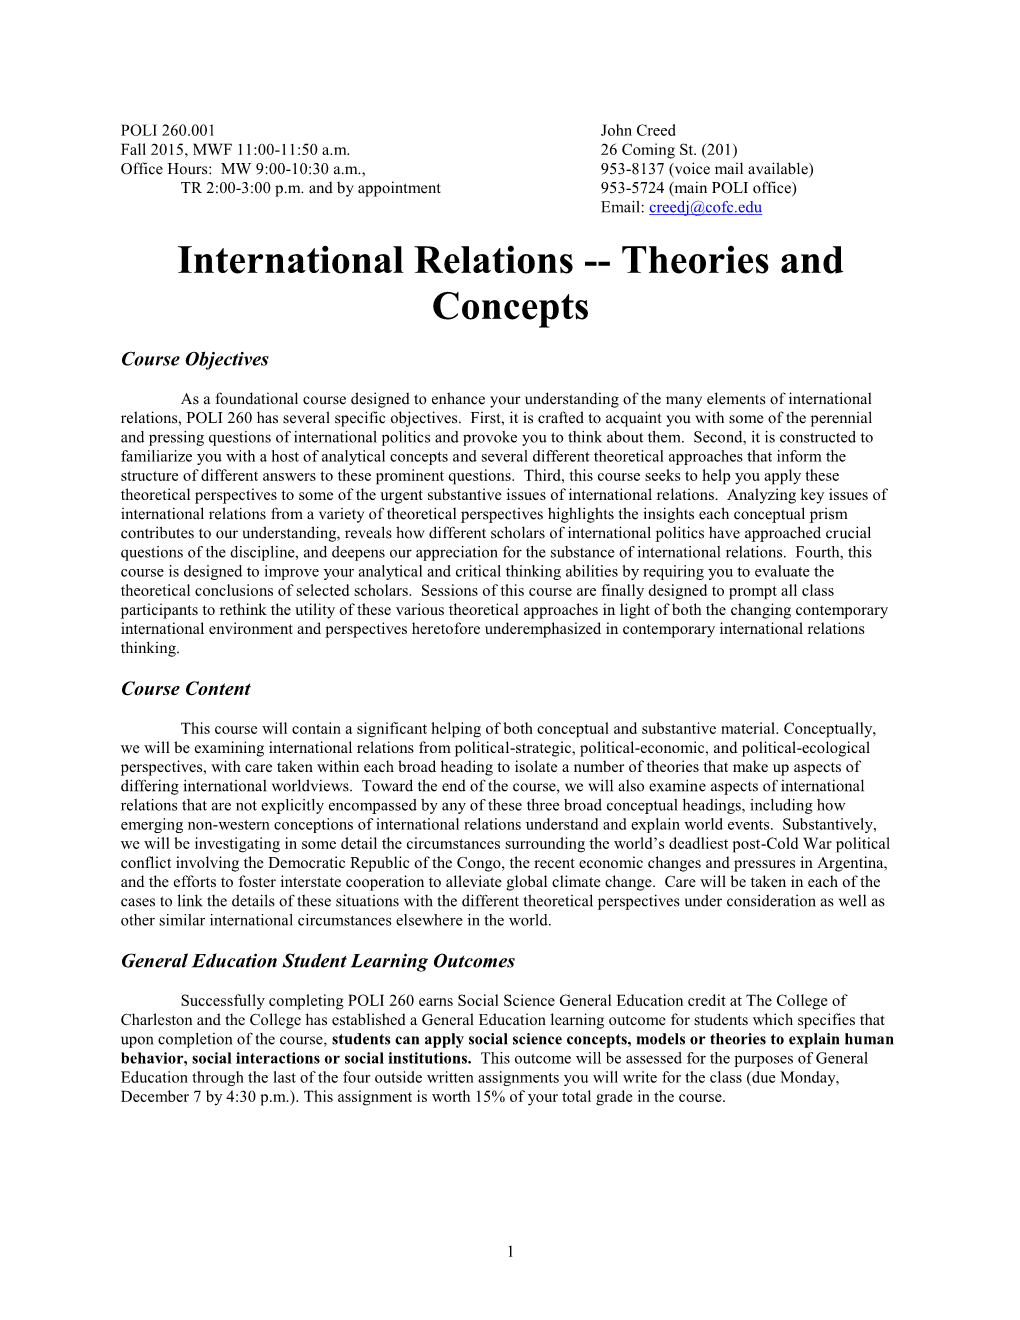 International Relations -- Theories and Concepts